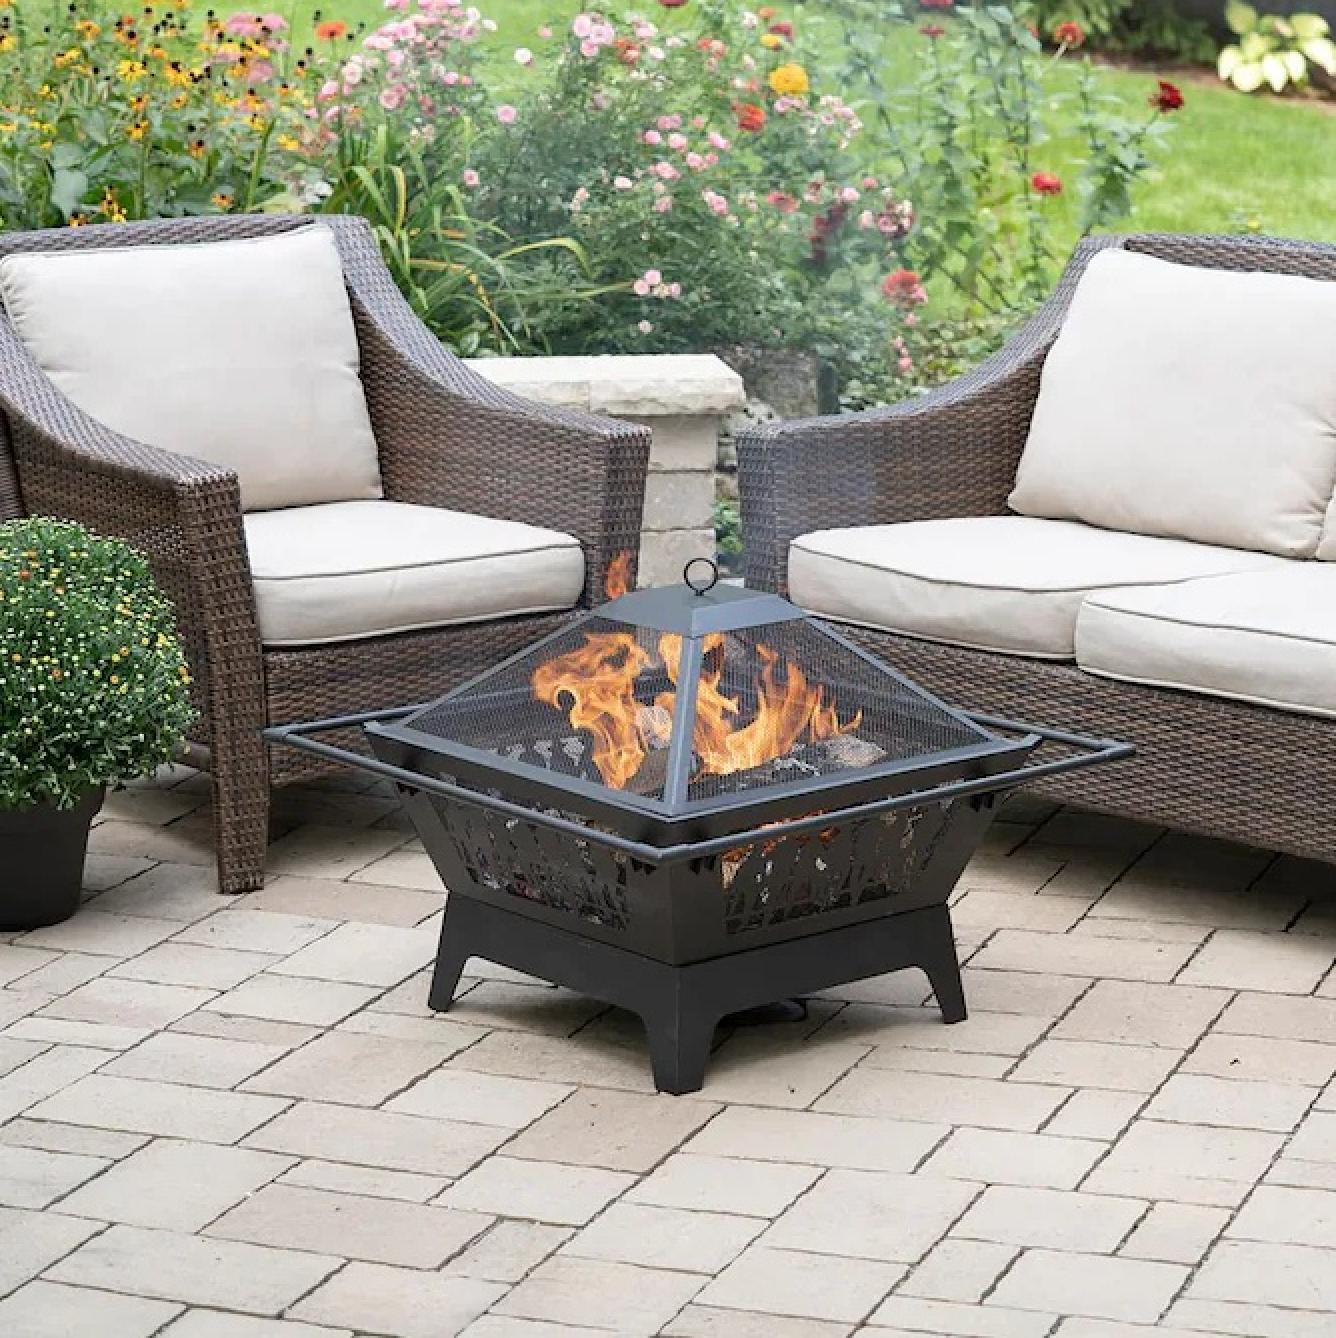 Blue Sky Outdoor Living Square Fire Pit